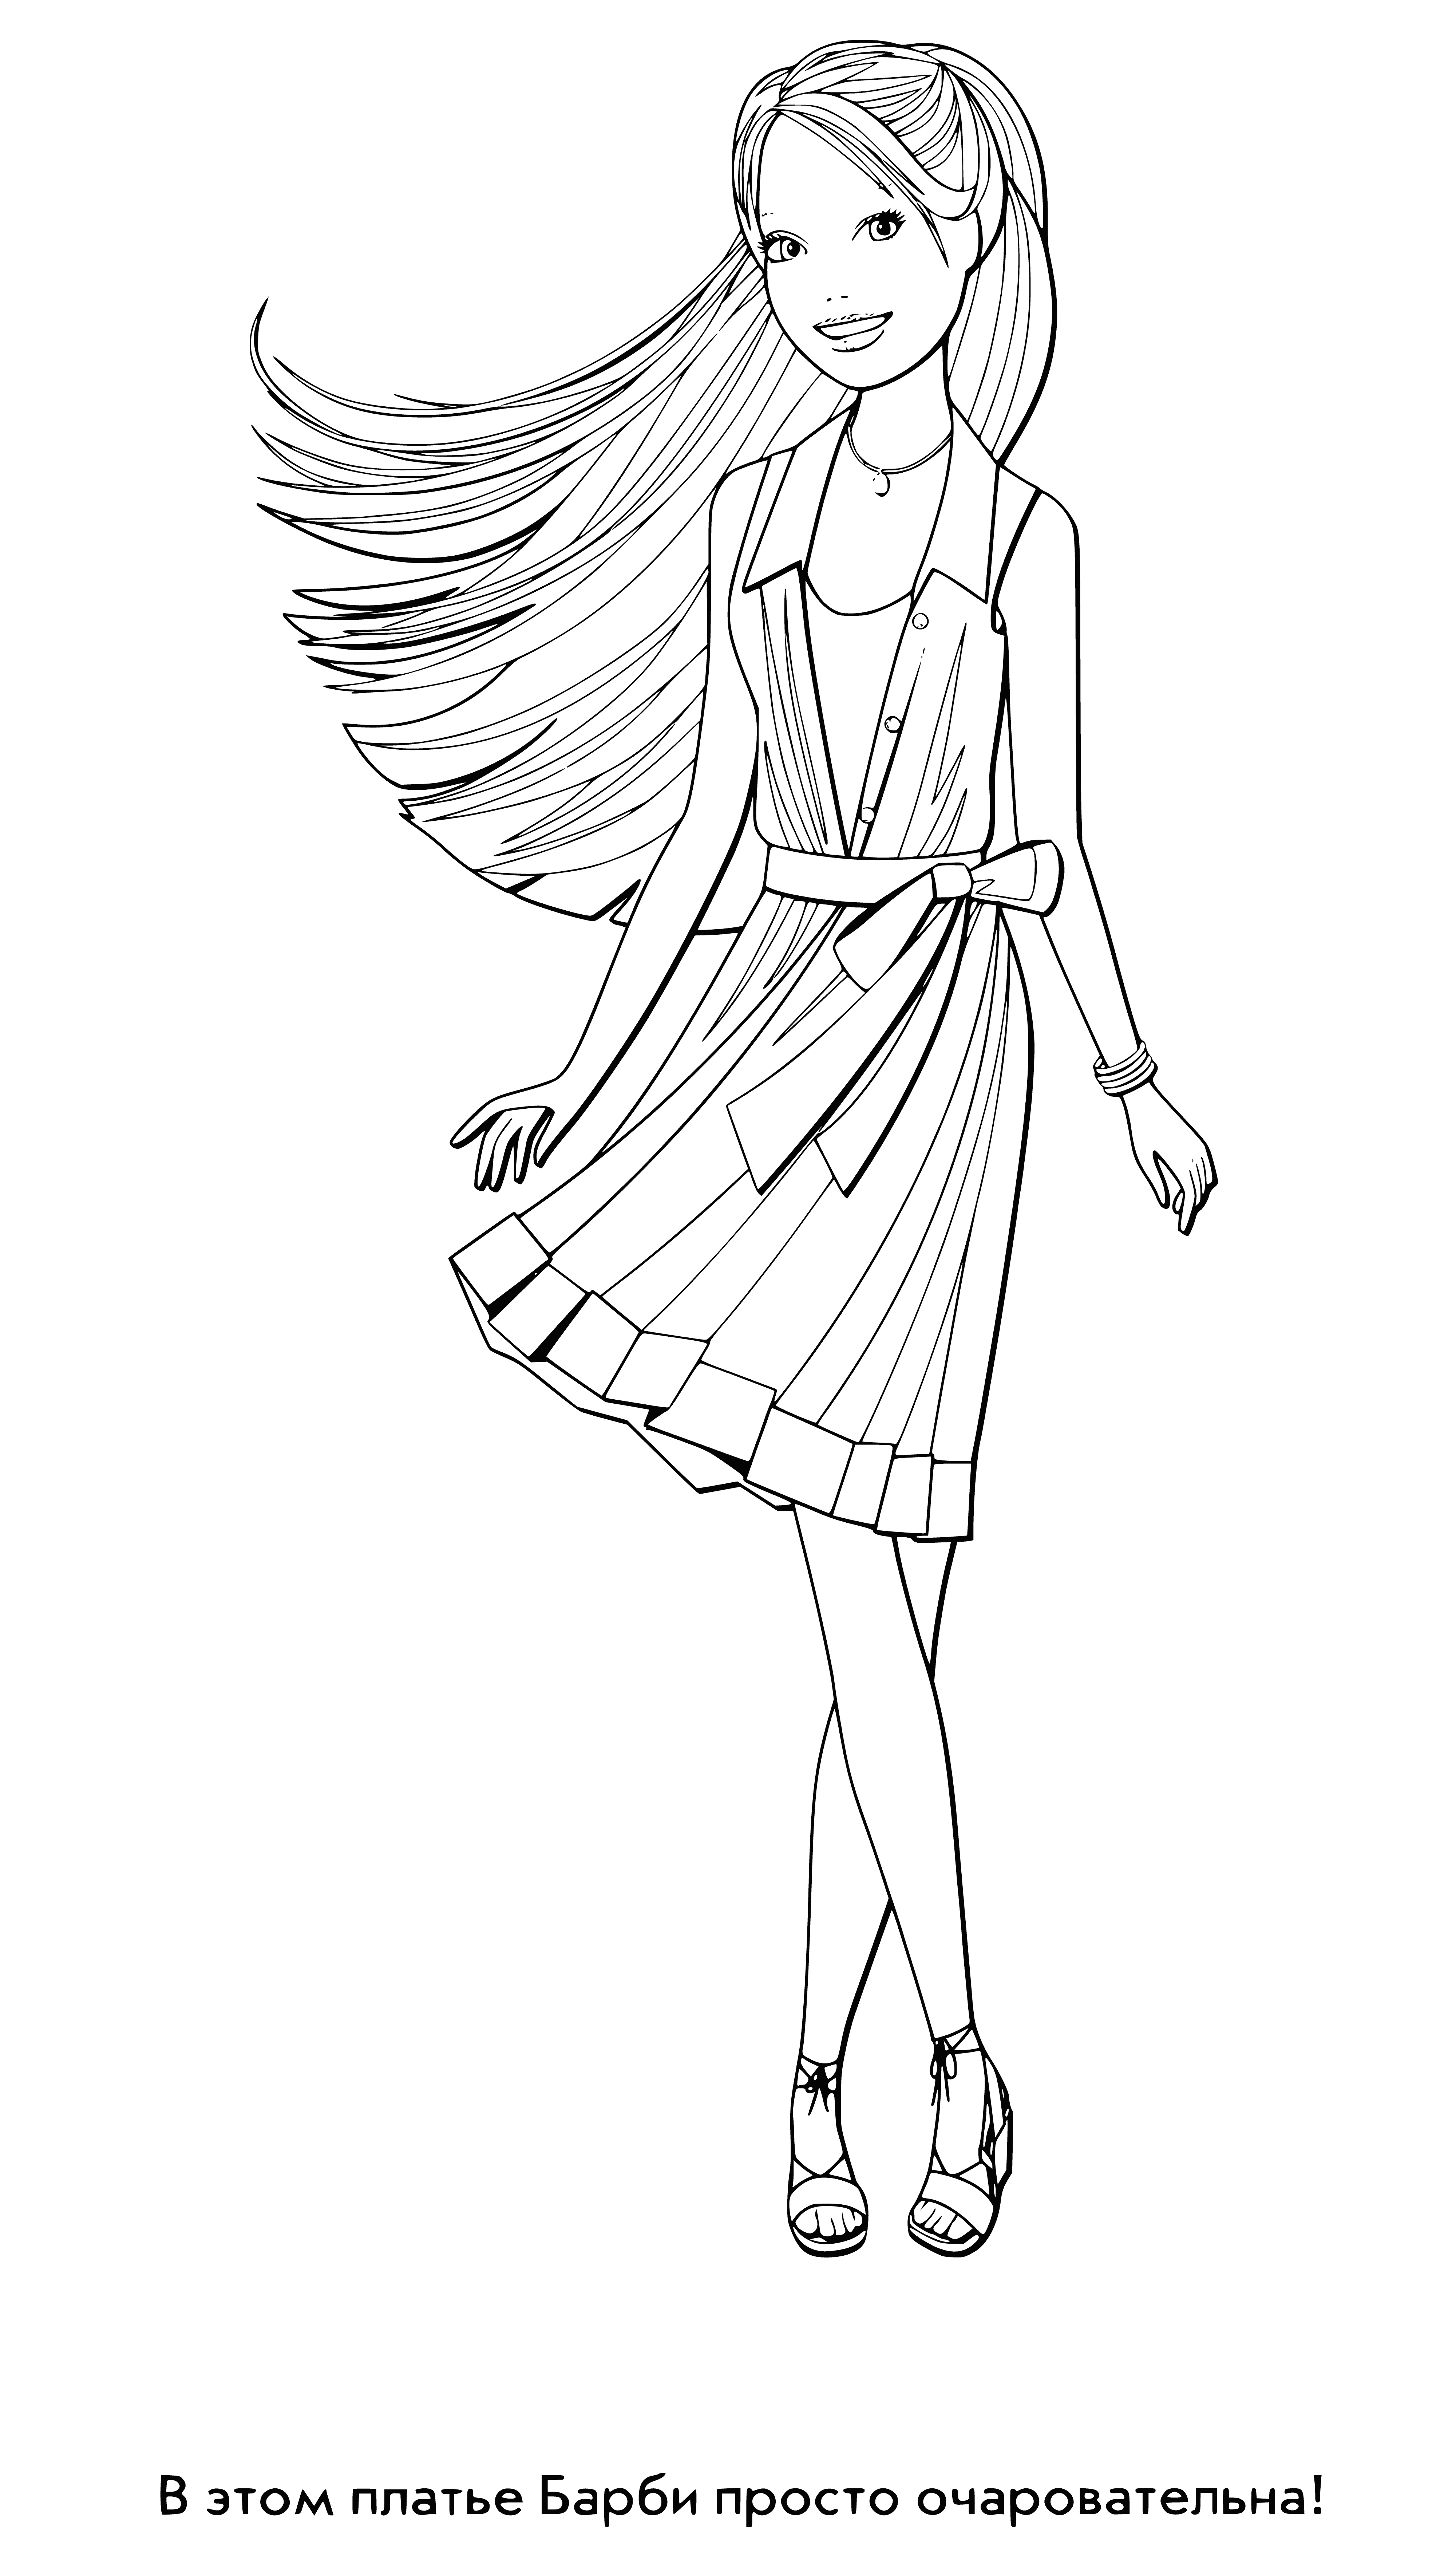 coloring page: Barbie wears pink dress w/ white collar,bow, ruffled skirt, tulle layer & pink shoes w/white stripes.